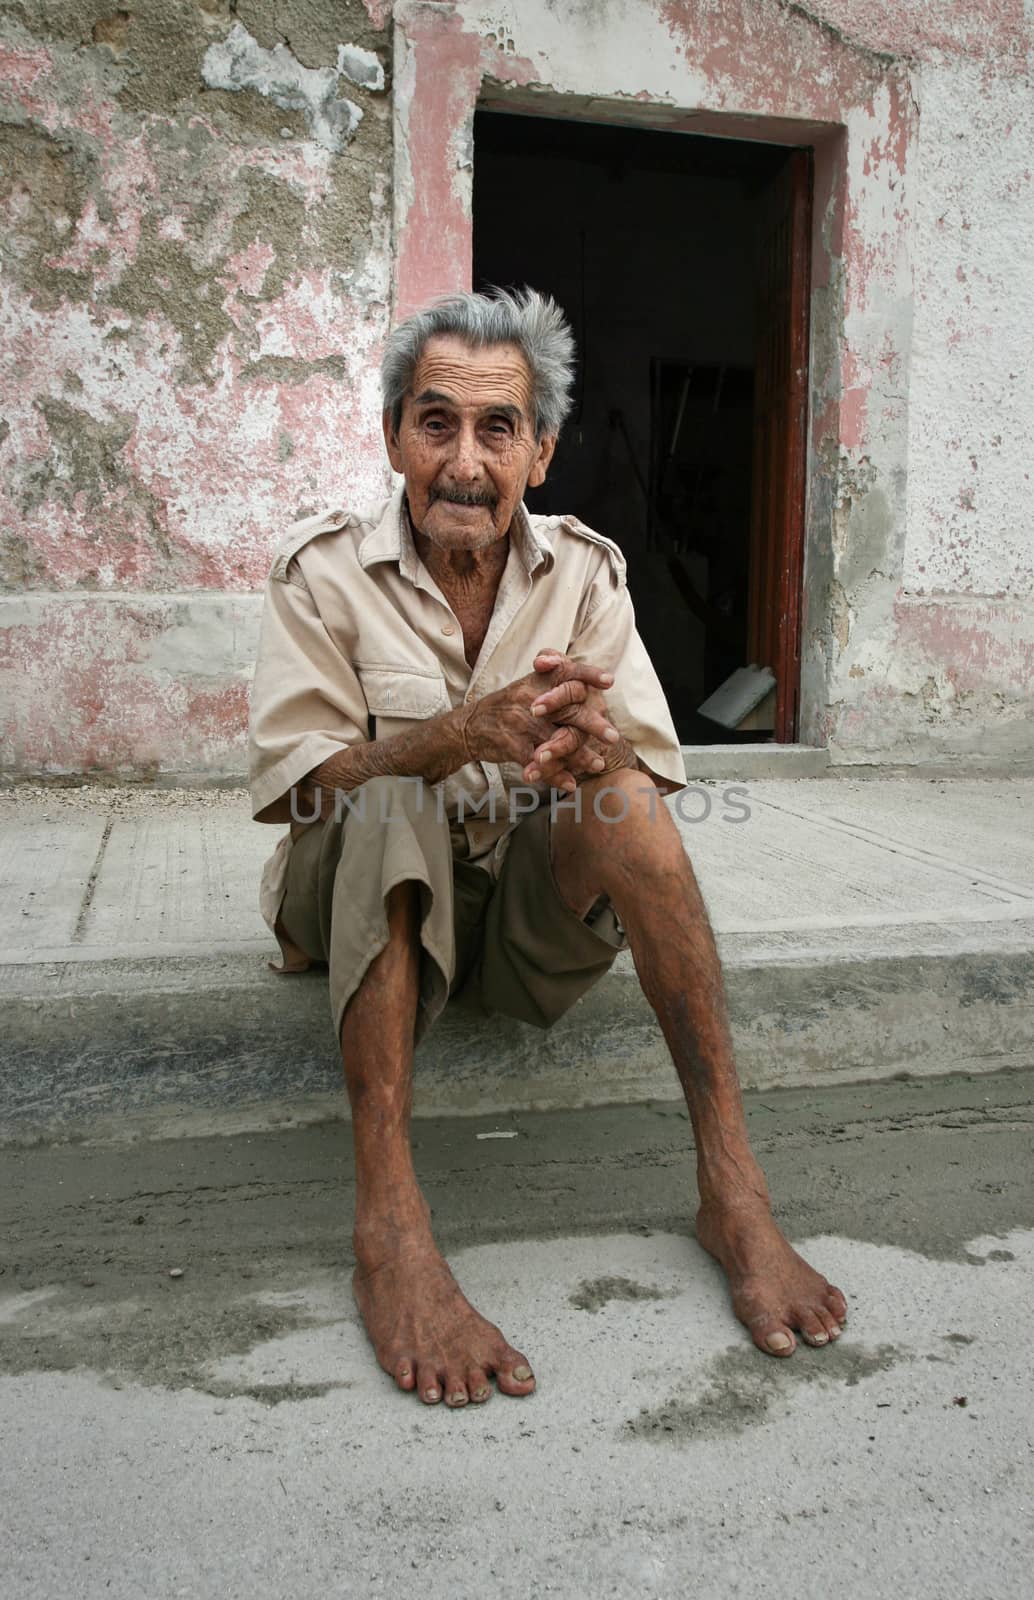 Celestun, Mexico - October 9, 2007: Poor Celestun resident sitting barefoot on his porch ground on a hot day with tired expression in his face.